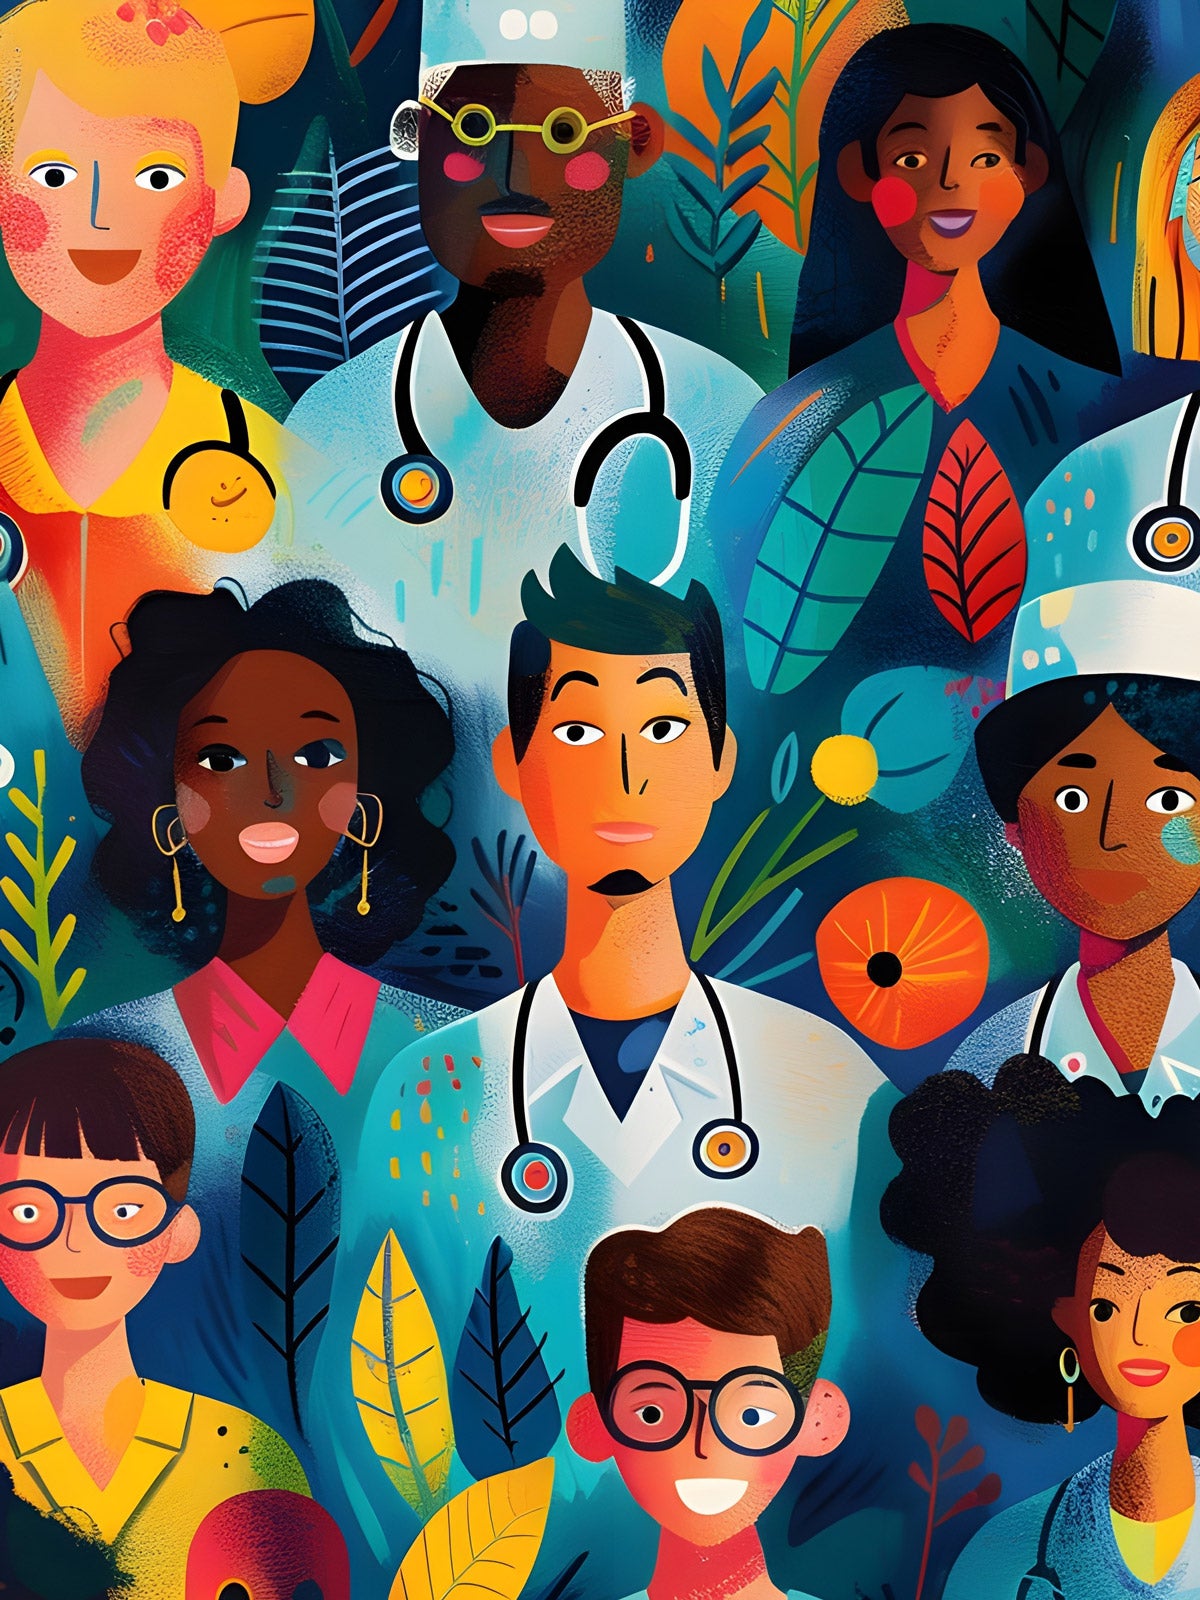 Colorful, diverse illustration of healthcare workers, doctors, nurses, and medical staff.